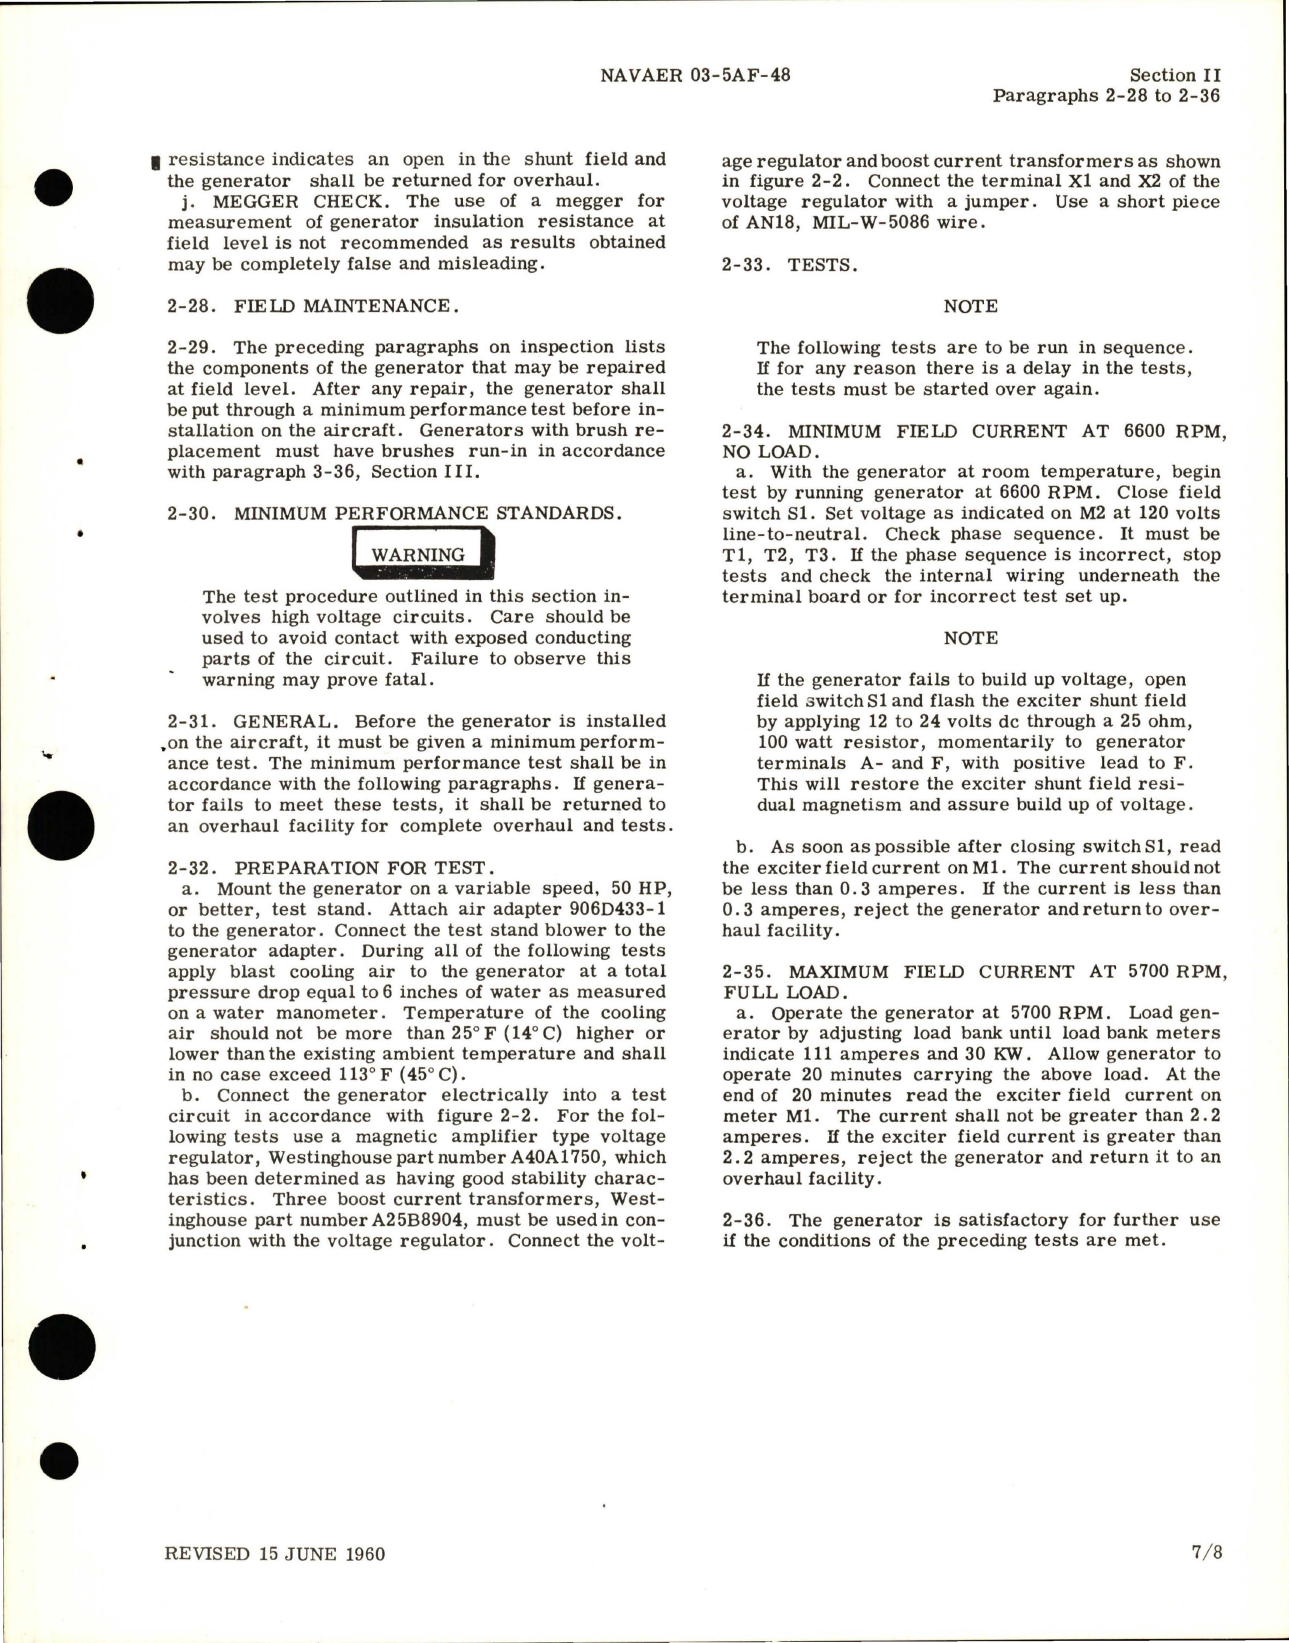 Sample page 7 from AirCorps Library document: Operation, Service and Overhaul Instructions for AC Generator - Parts 903J820-1 and A50J207-2 